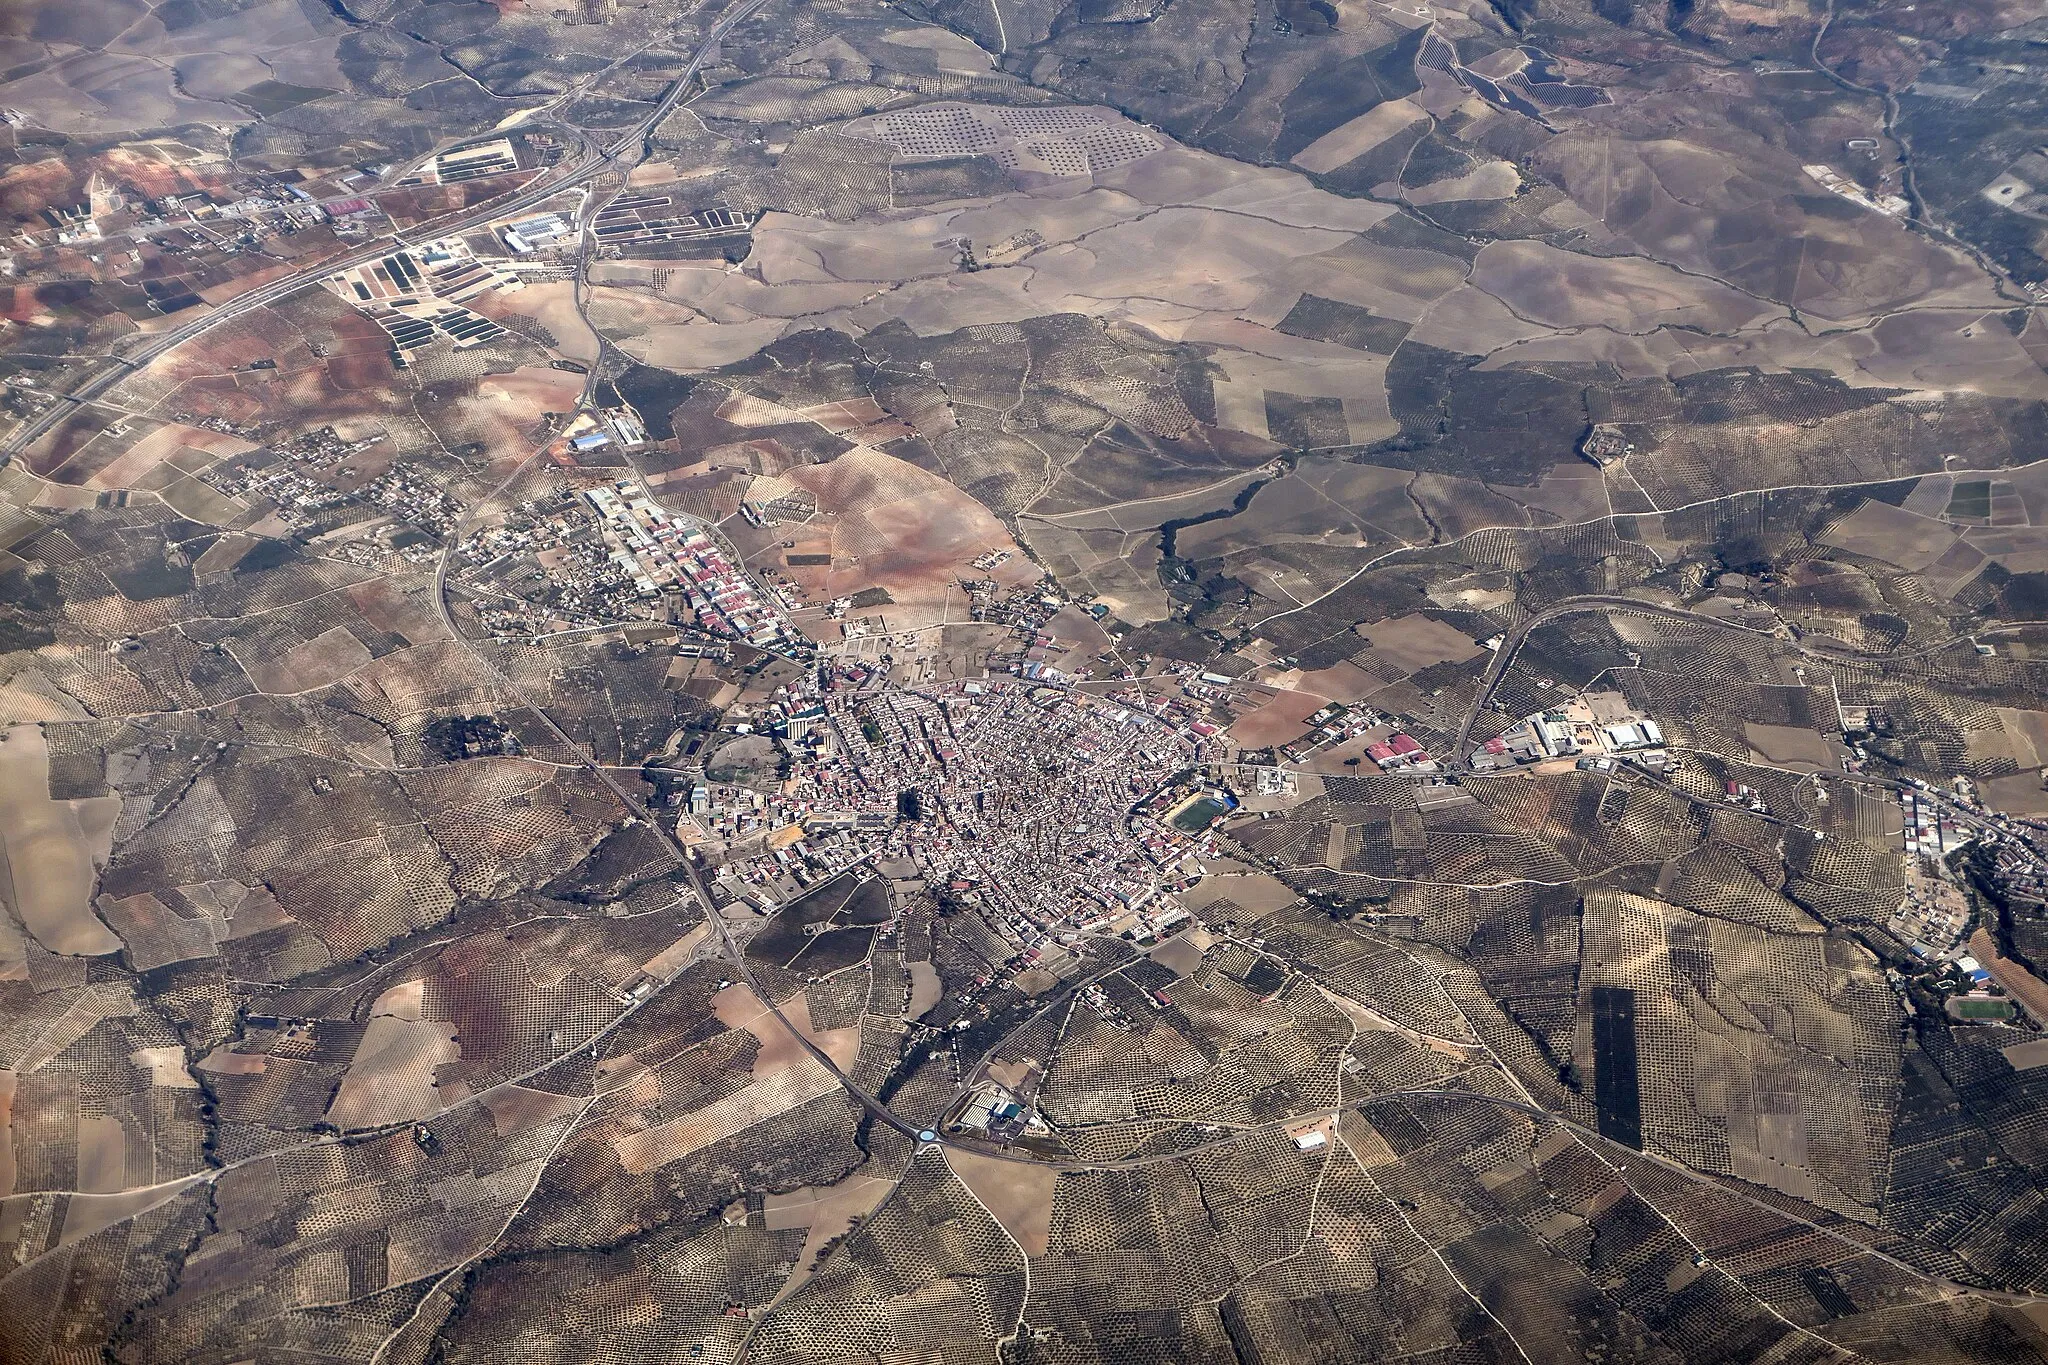 Photo showing: An aerial photo of La Rambla, a town in Andalusia, Spain.